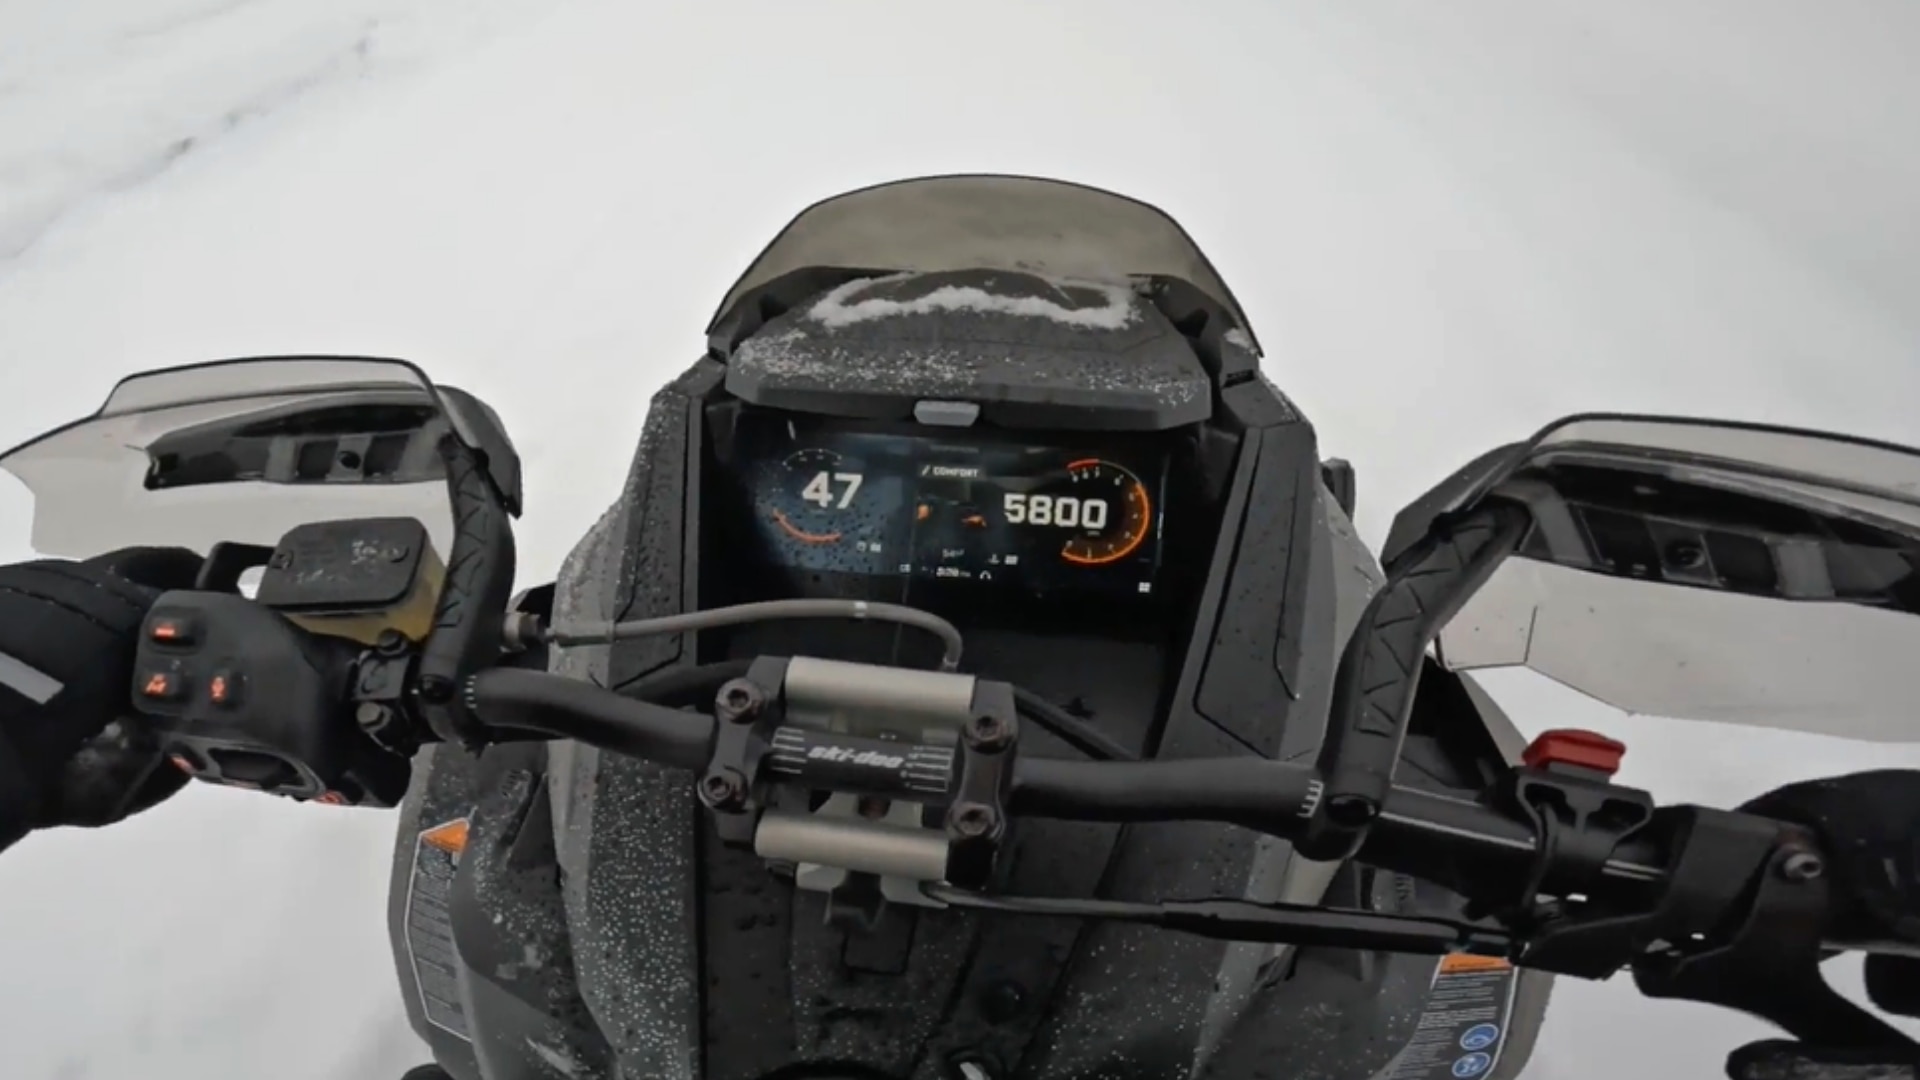 10.25" Color Touchscreen Display with BRP Connect on a snowmobile